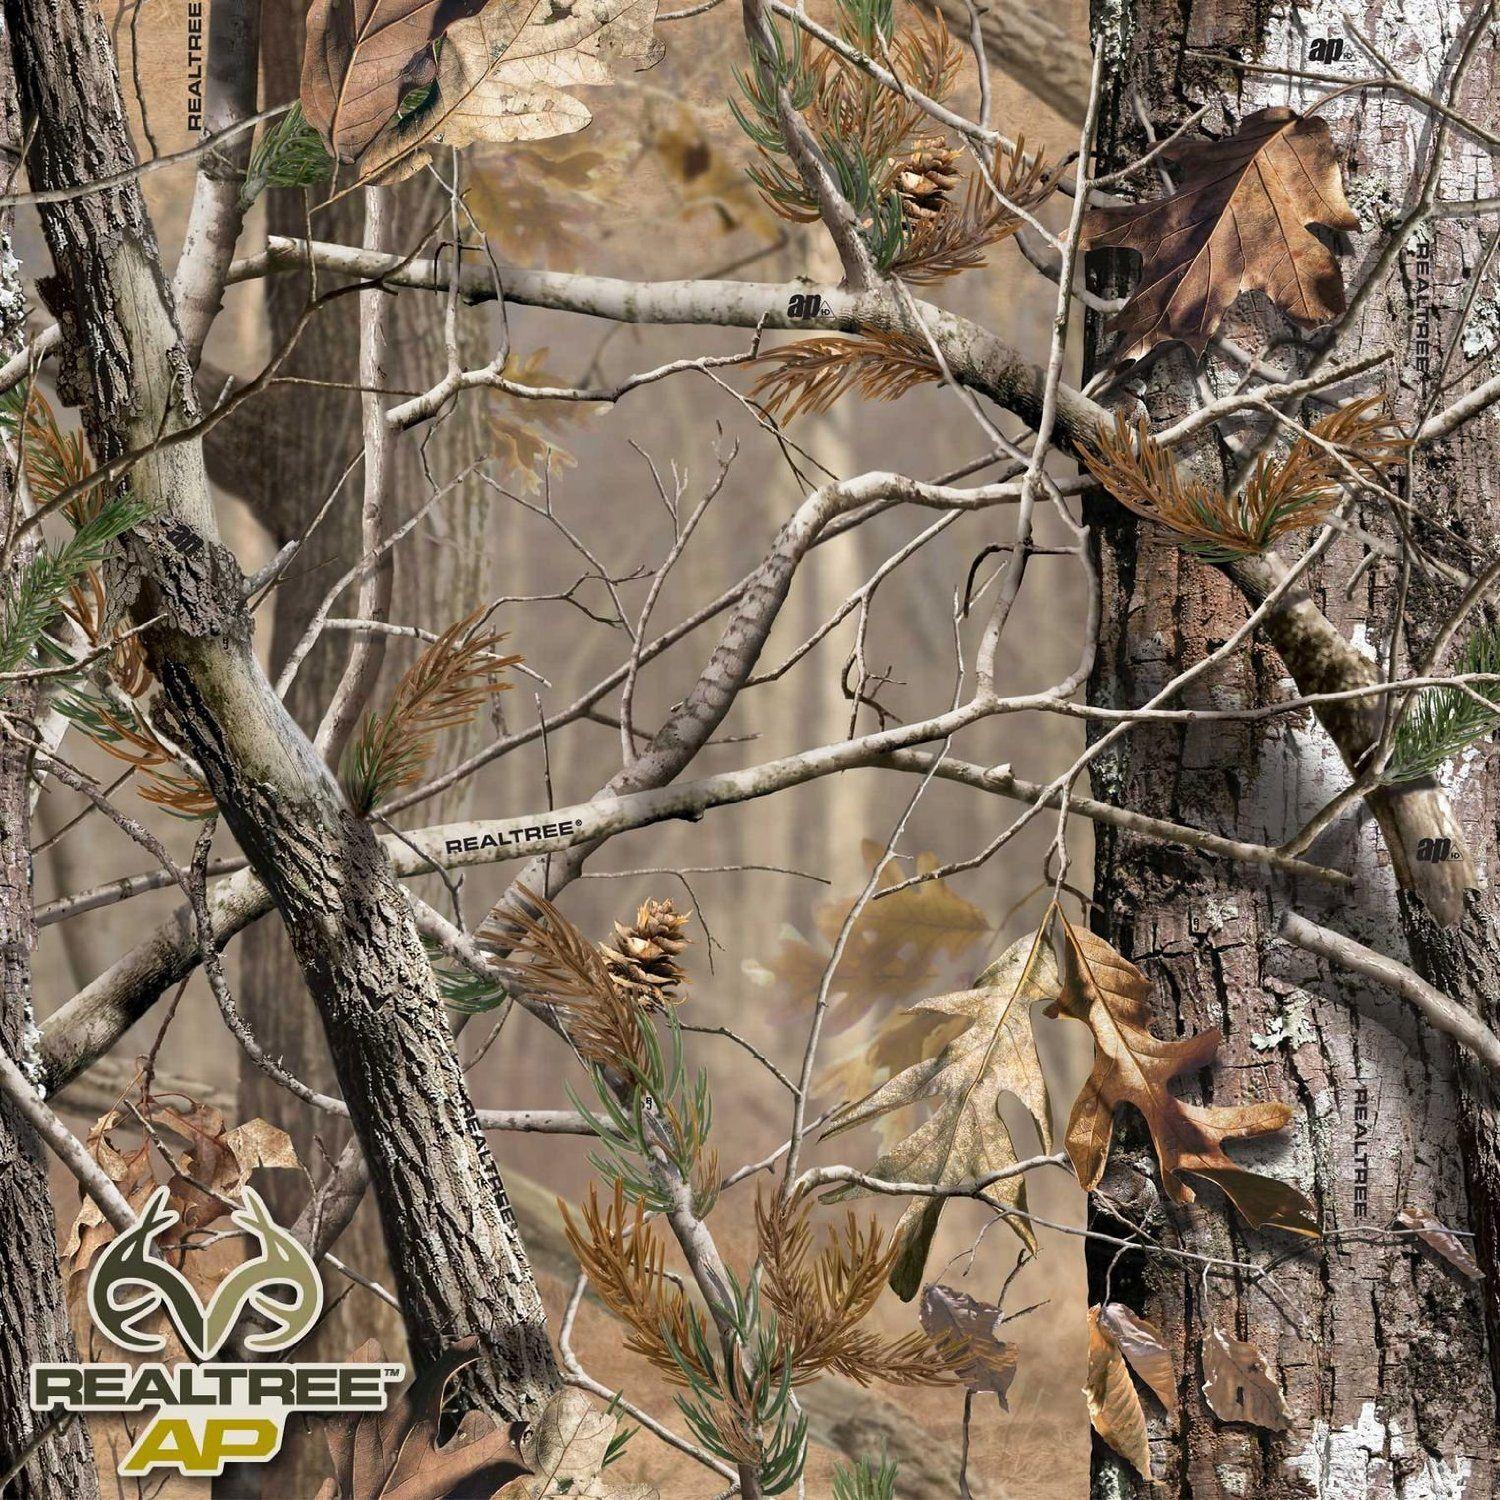 OutdoorHub: Can You Recognize These Camo Patterns?